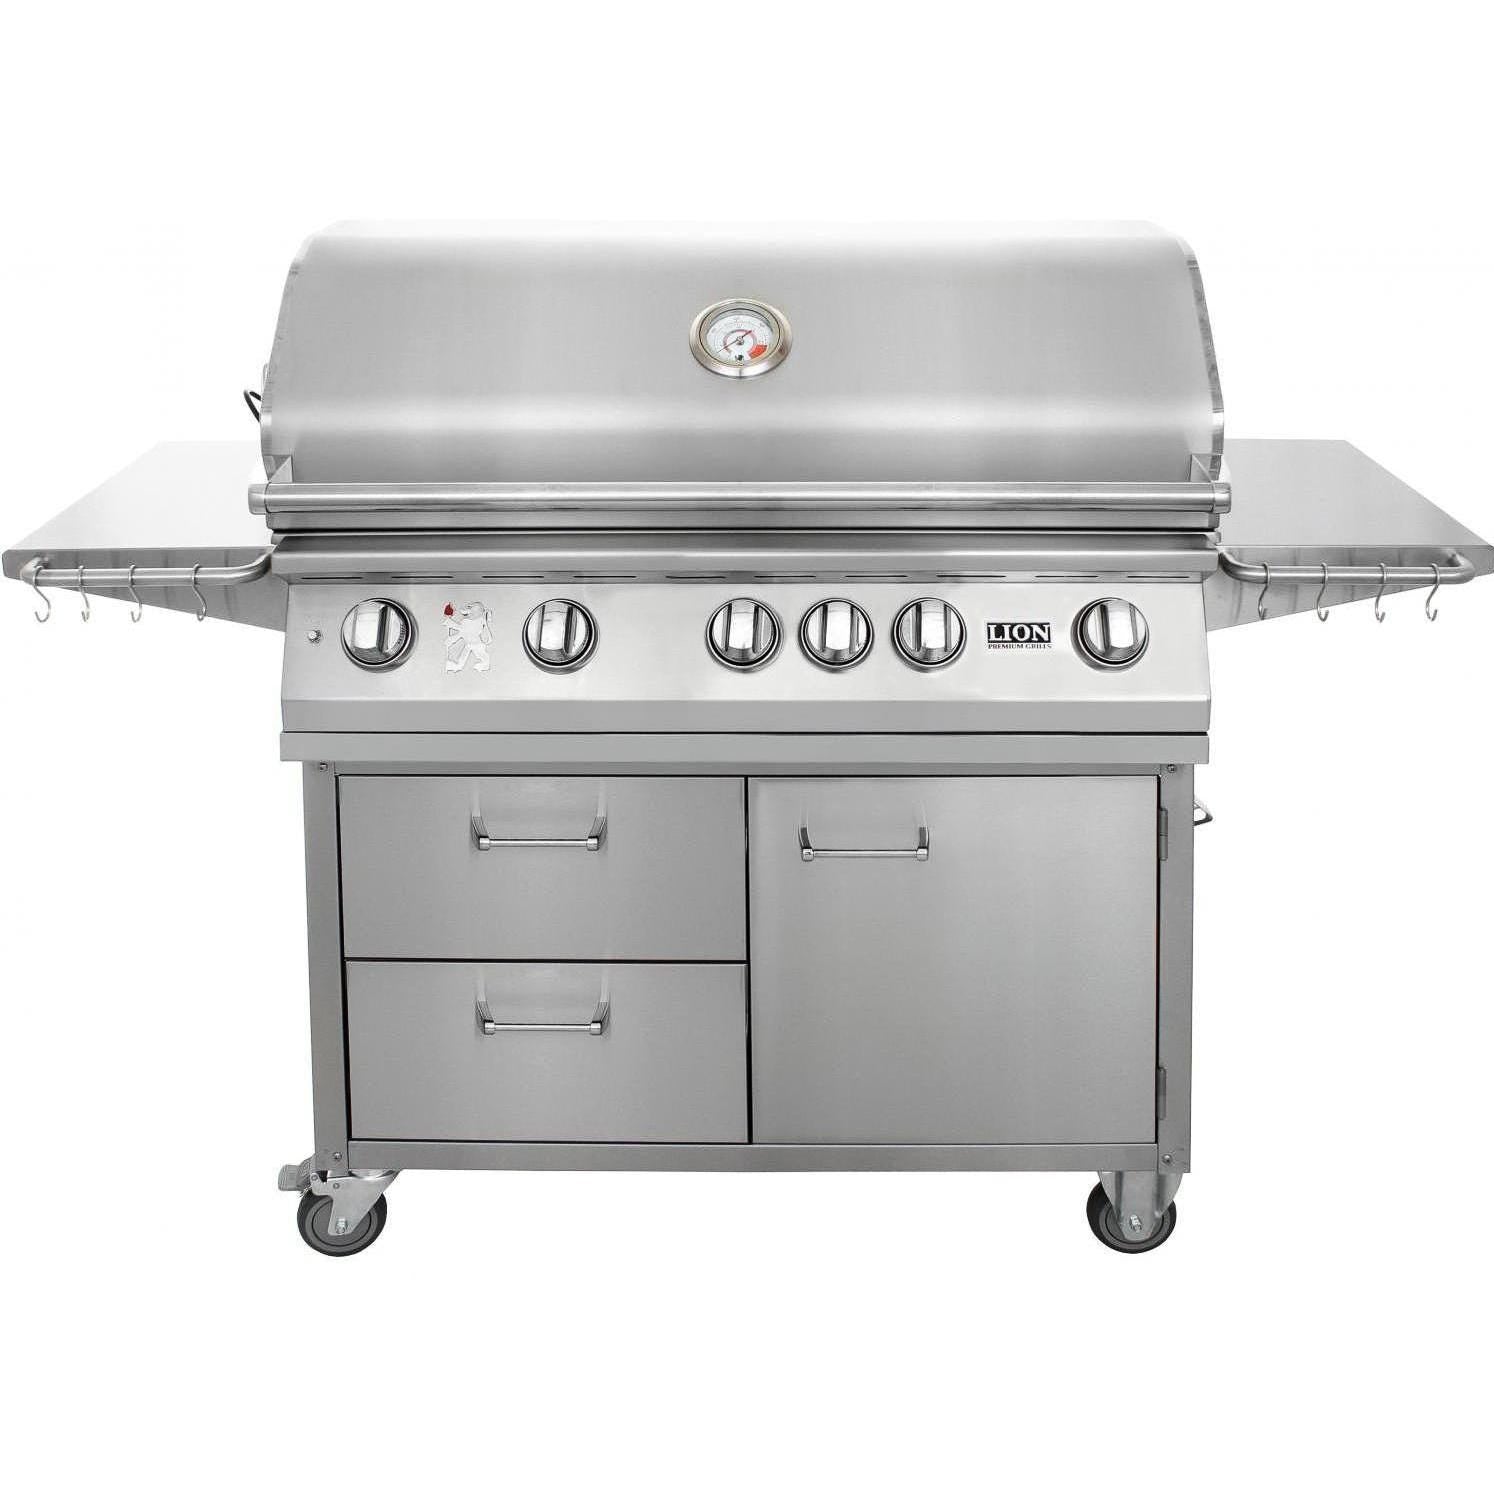 Lion L90000 40-Inch Stainless Steel Freestanding Gas Grill - L90000